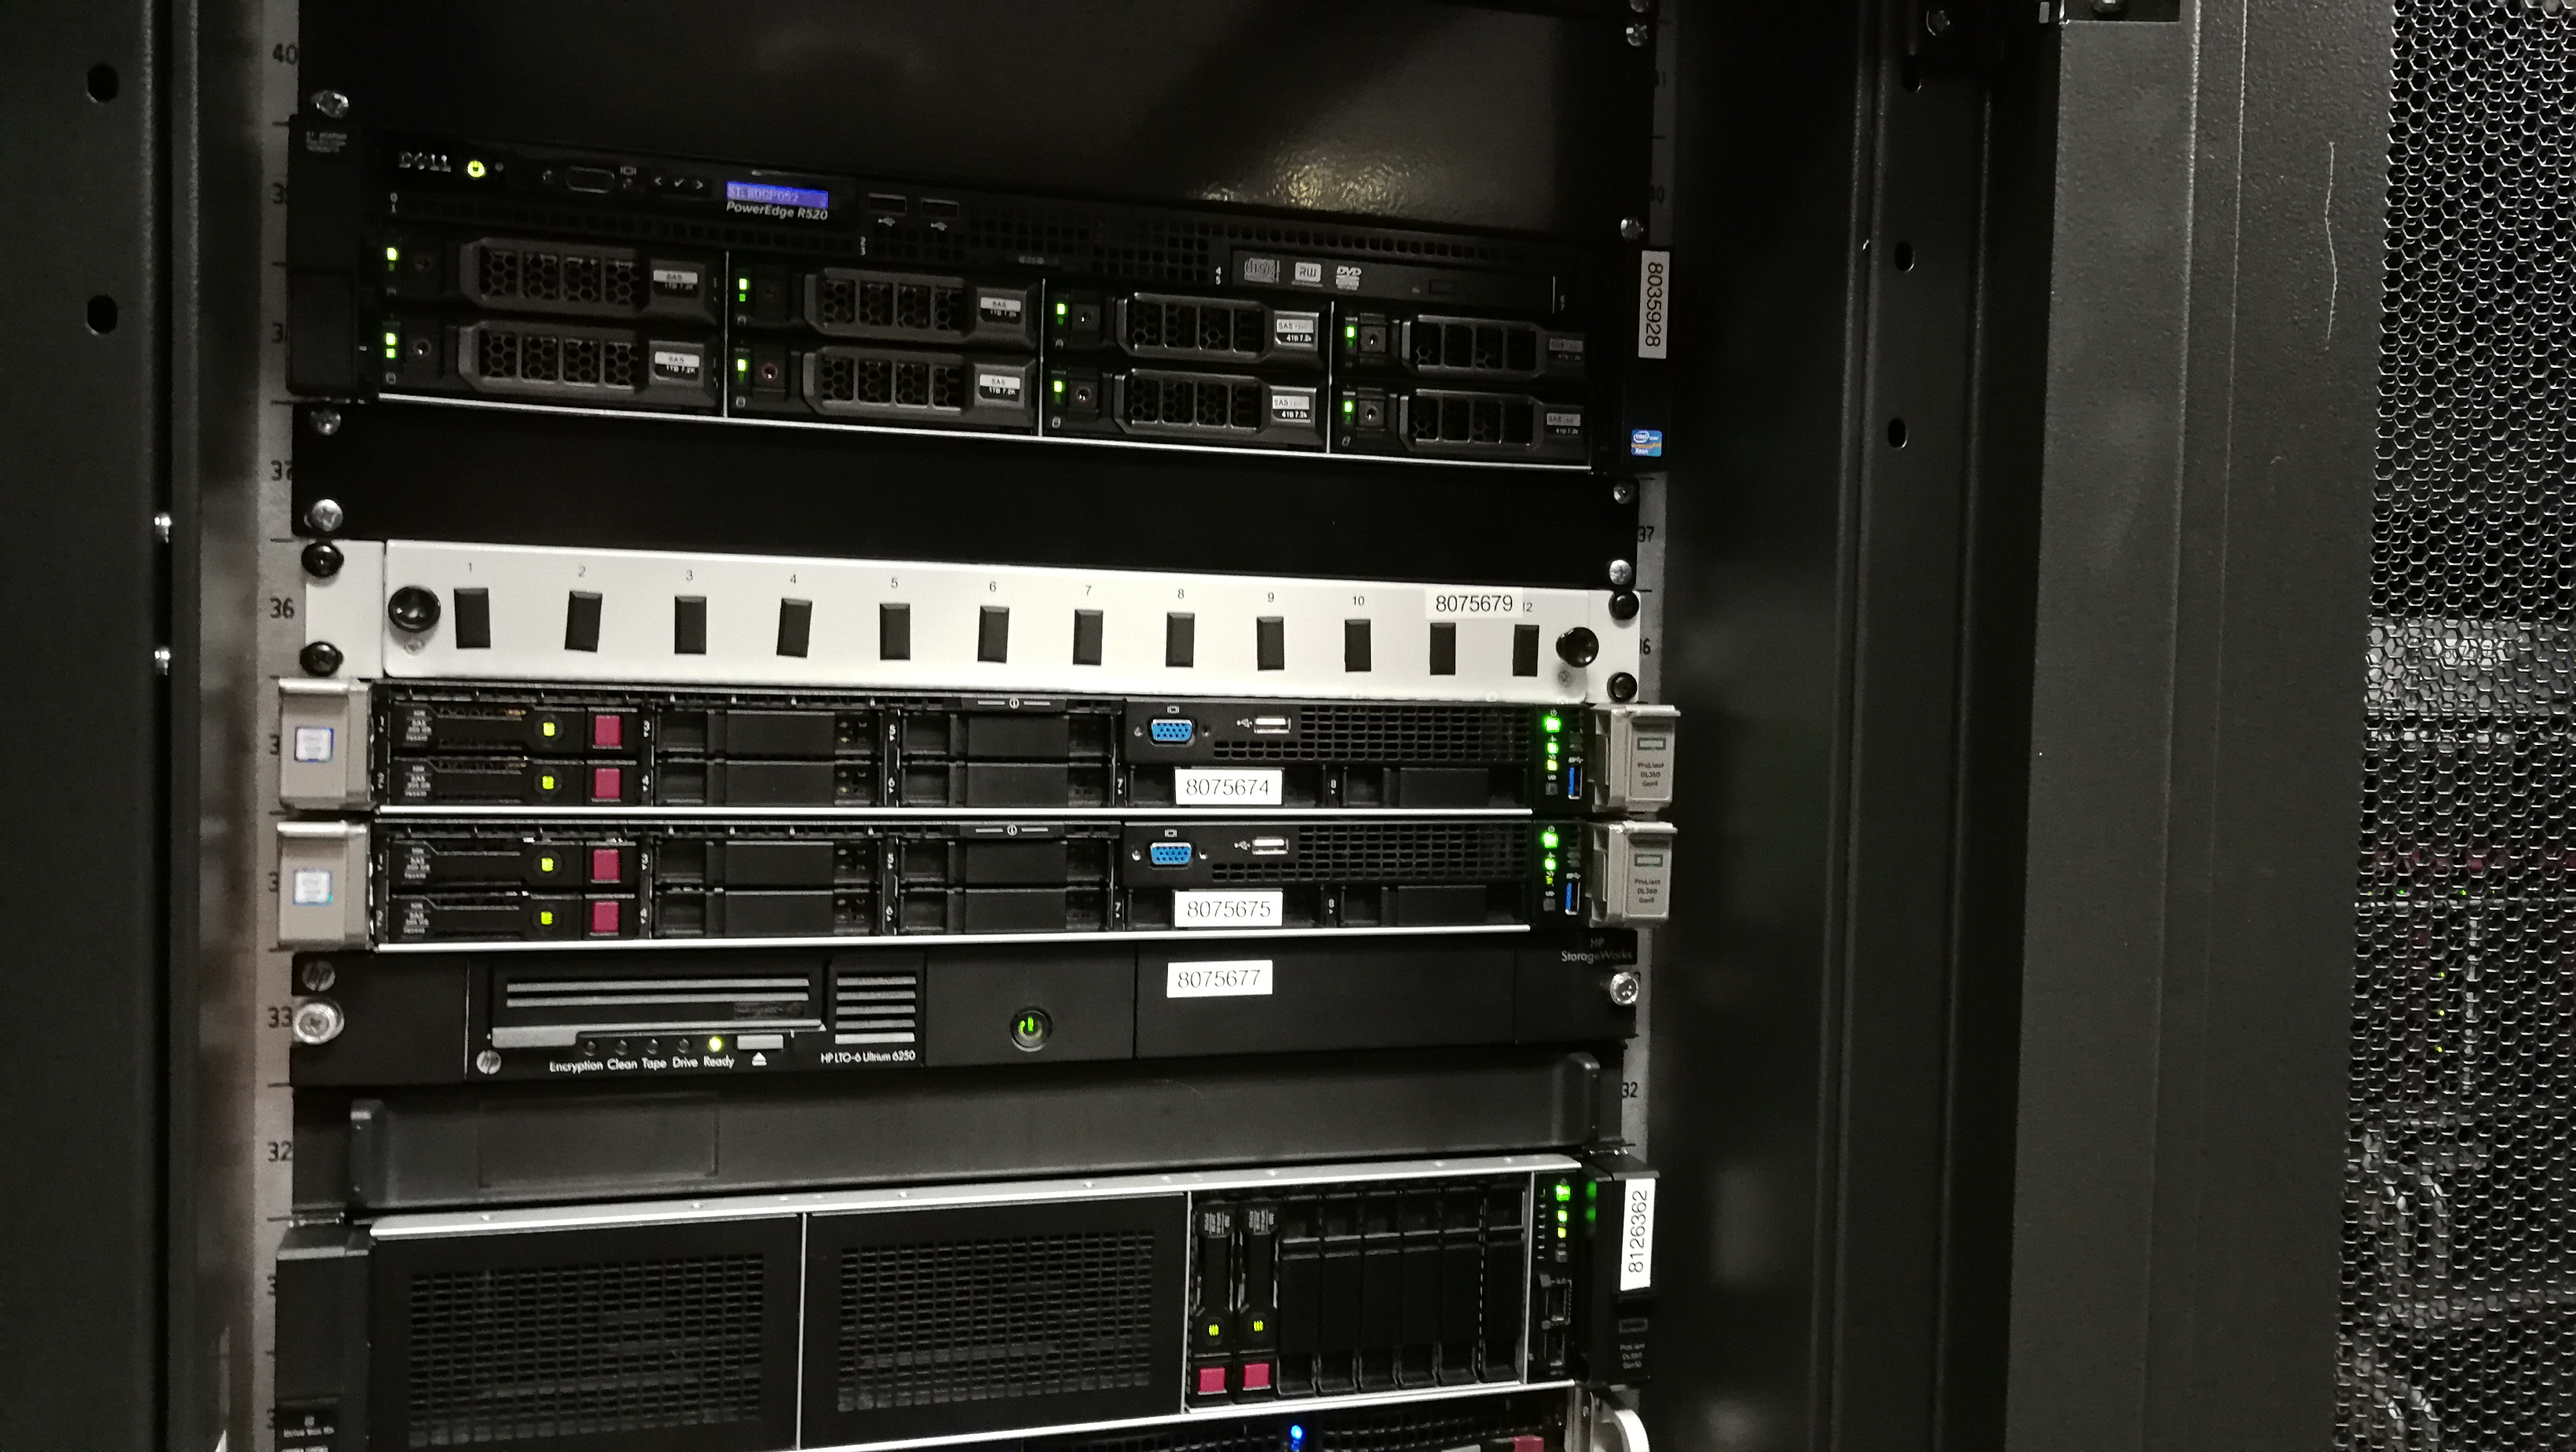 34 COD database server and high availability cluster